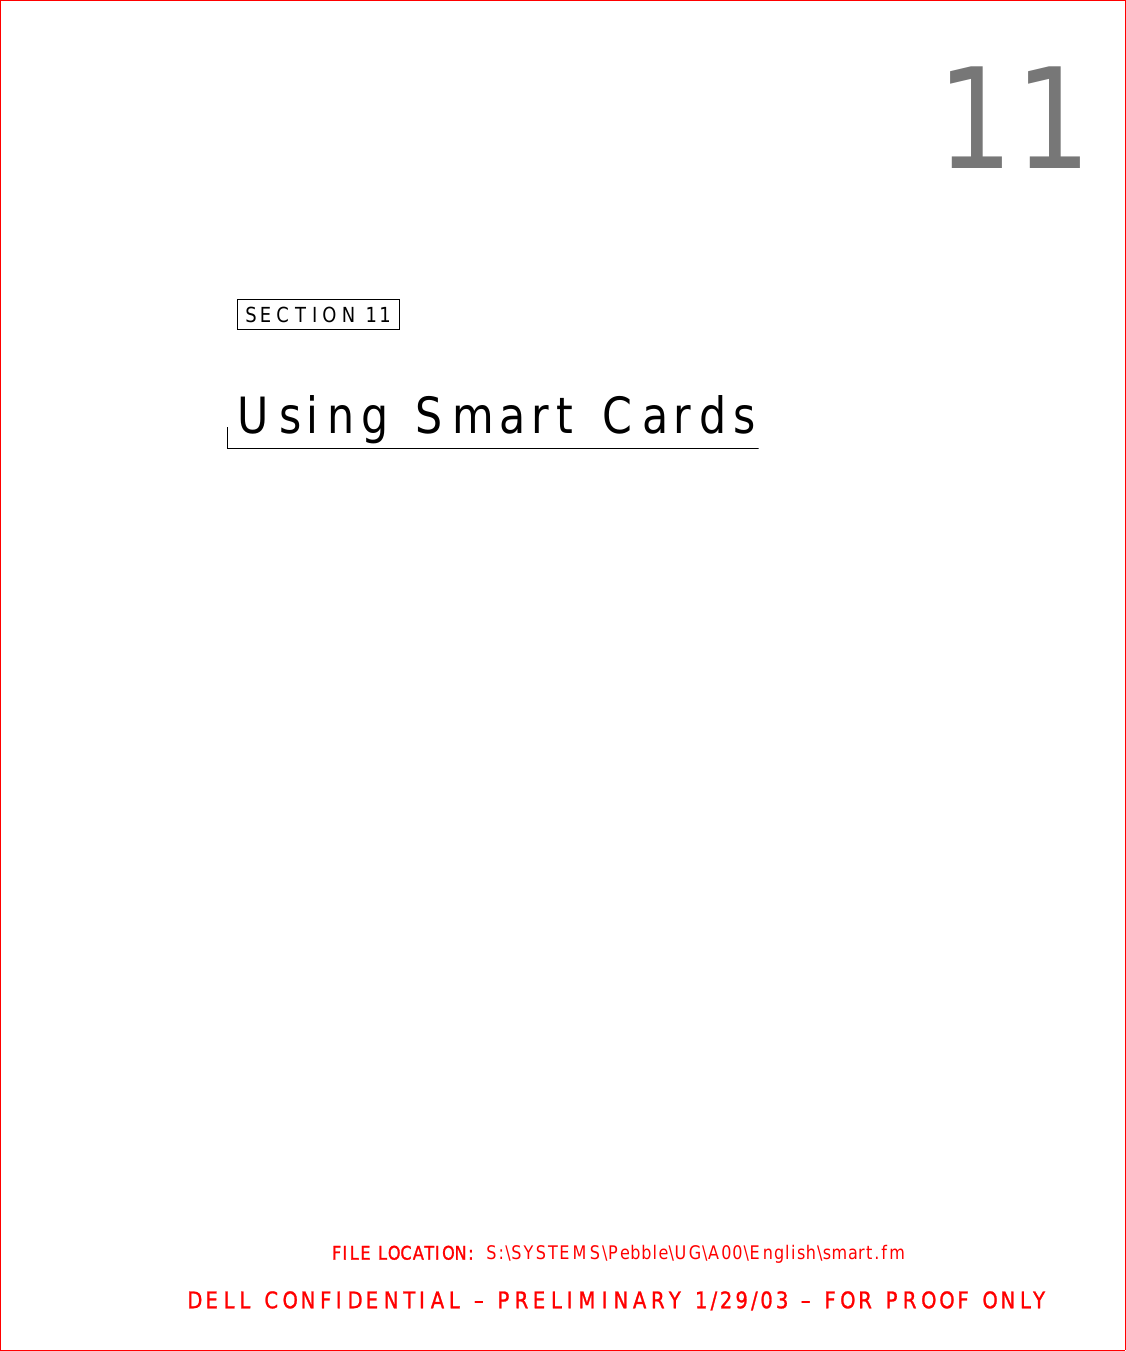 FILE LOCATION:  S:\SYSTEMS\Pebble\UG\A00\English\smart.fmDELL CONFIDENTIAL – PRELIMINARY 1/29/03 – FOR PROOF ONLY11SECTION 11Using Smart Cards 